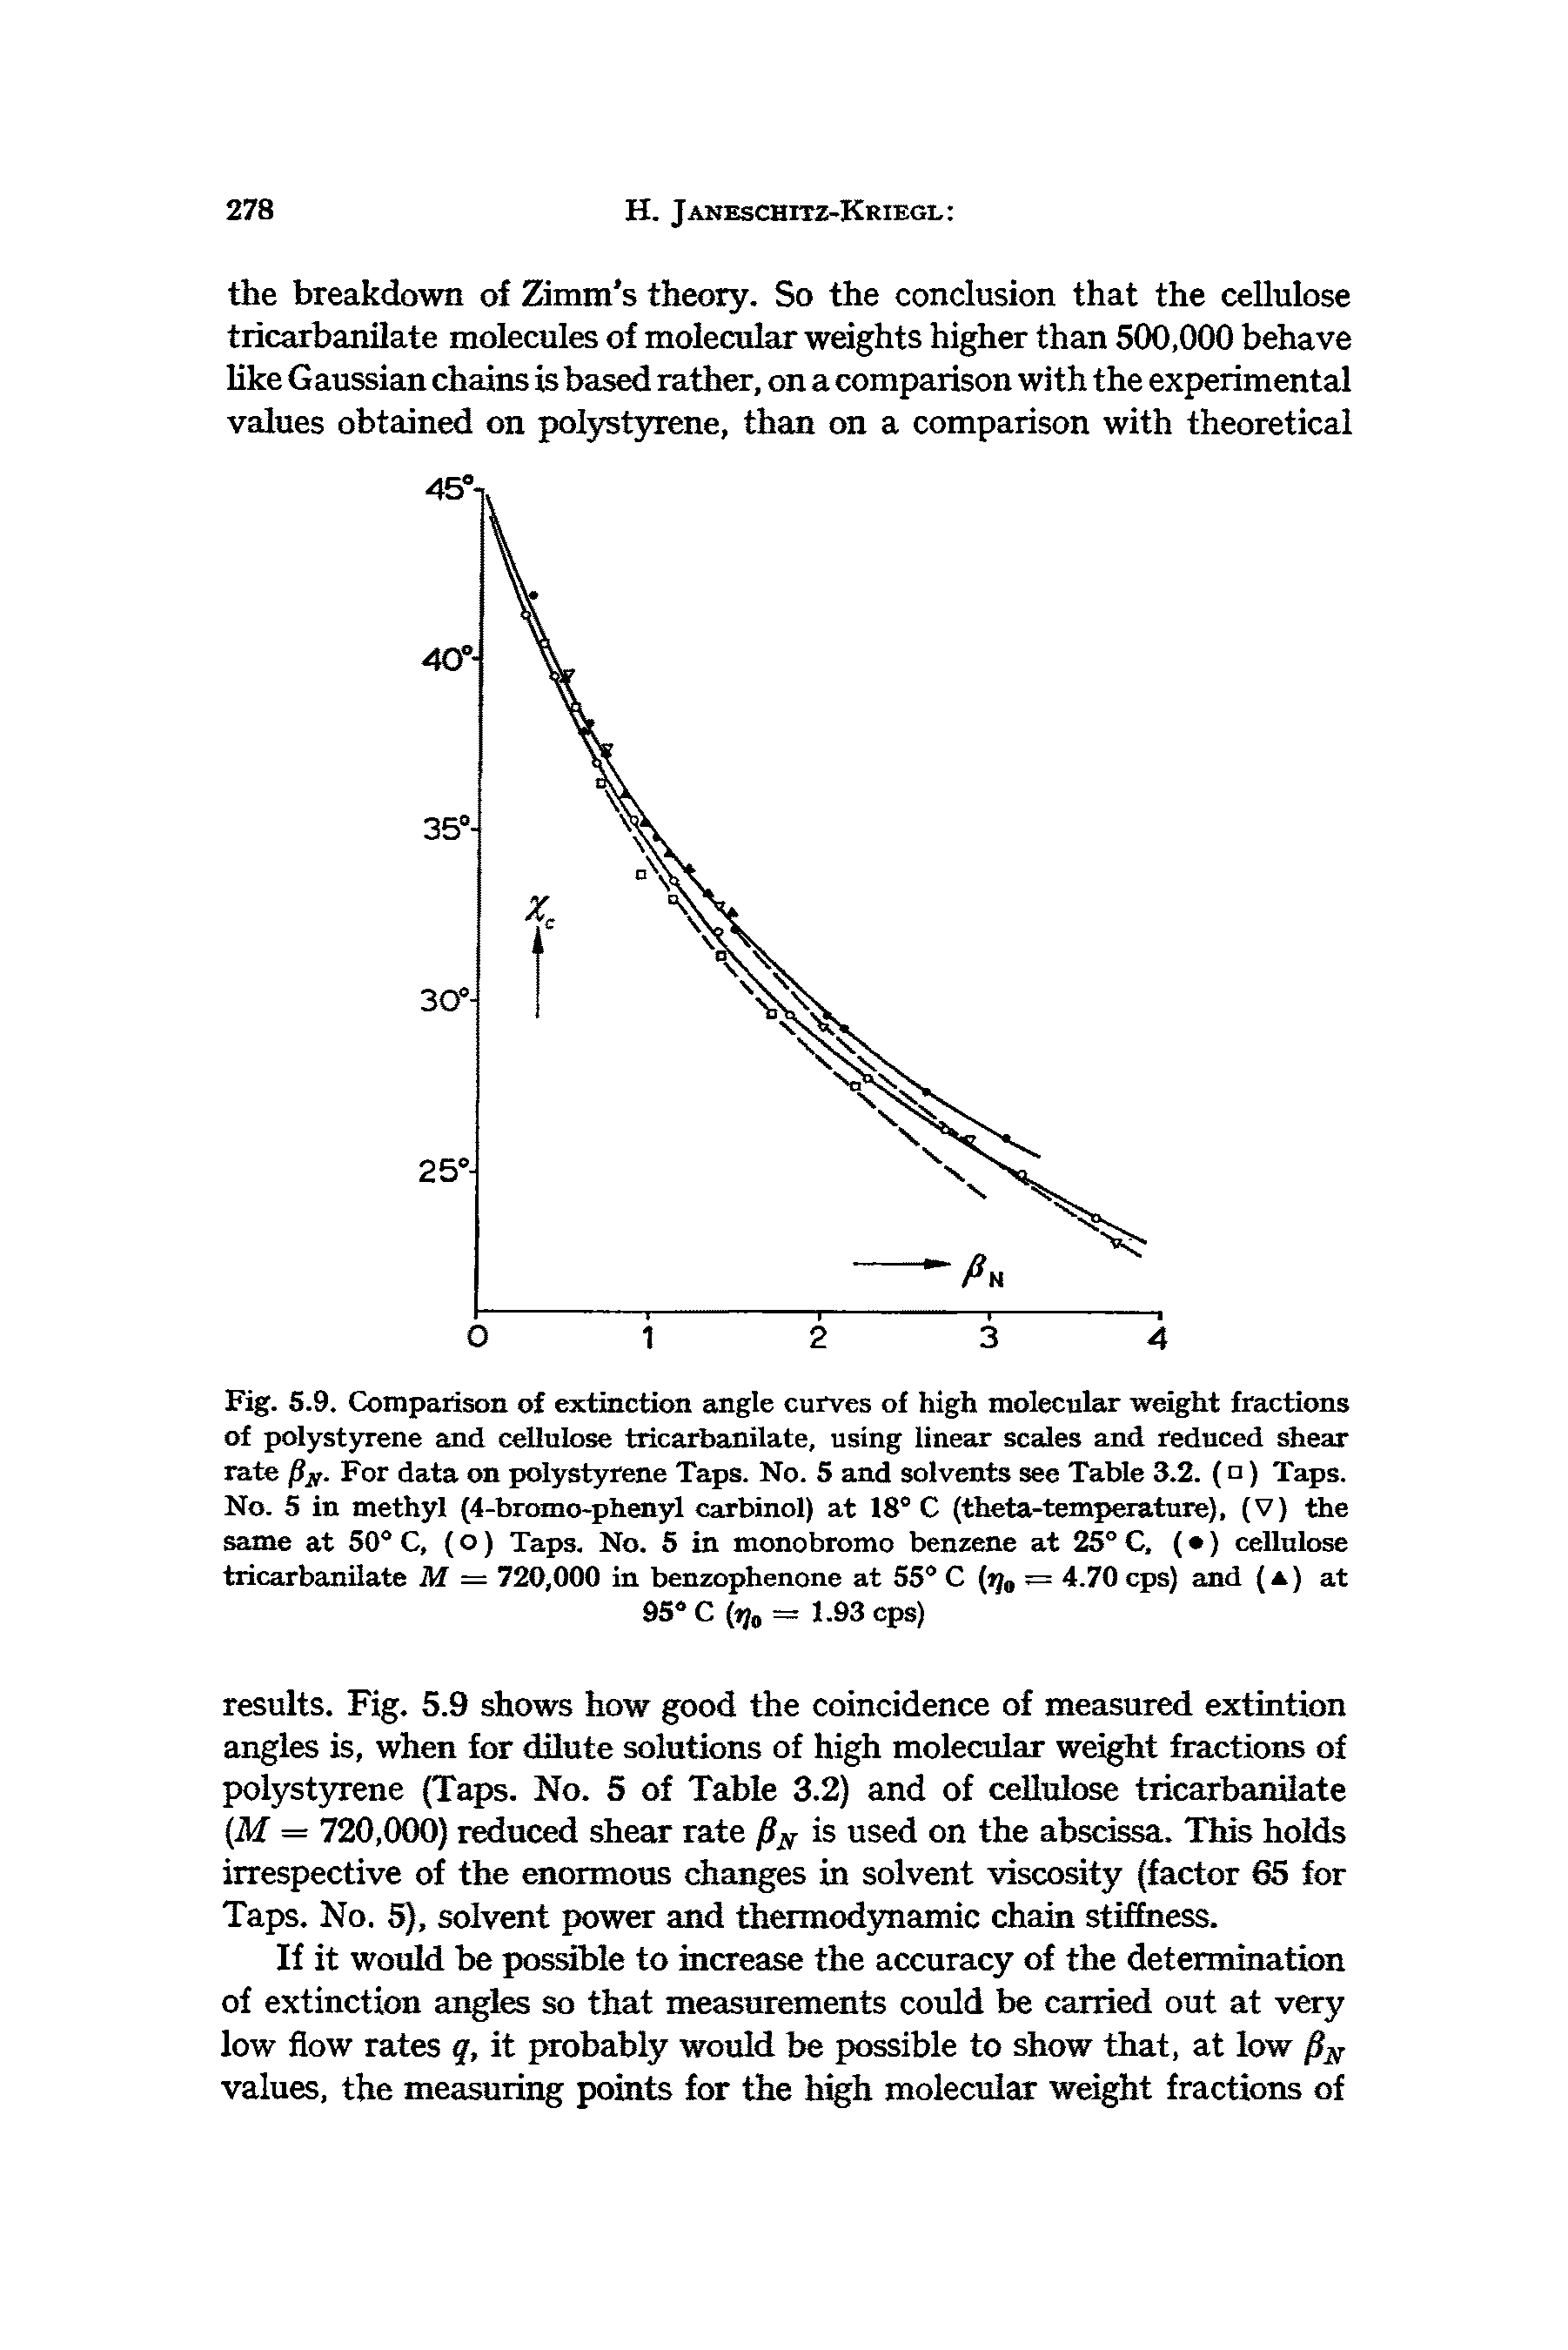 Fig. 5.9. Comparison of extinction angle curves of high molecular weight fractions of polystyrene and cellulose tricarbanilate, using linear scales and reduced shear rate For data on polystyrene Taps. No. 5 and solvents see Table 3.2. (n) Taps. No. 5 in methyl (4-bromo-phenyl carbinol) at 18° C (theta-temperature), (V) the same at 50° C, (o) Taps. No. 5 in monobromo benzene at 25° C, ( ) cellulose tricarbanilate M = 720,000 in benzophenone at 55° C (jy = 4.70 cps) and (a) at...